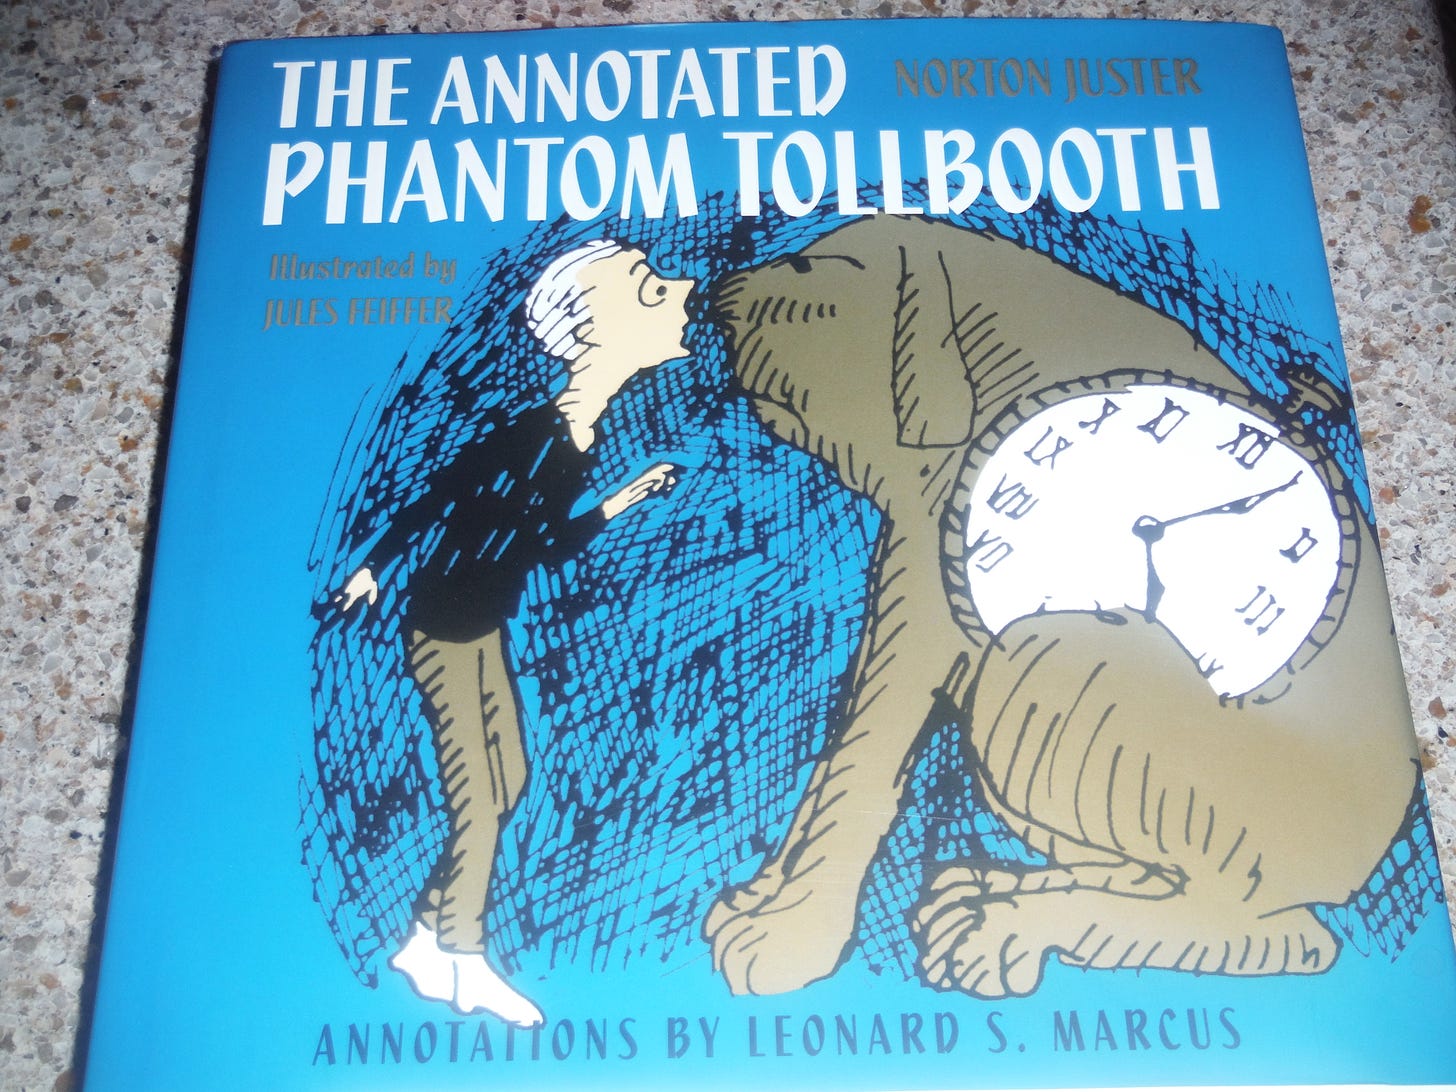 Cover of "The Phantom Tollbooth"